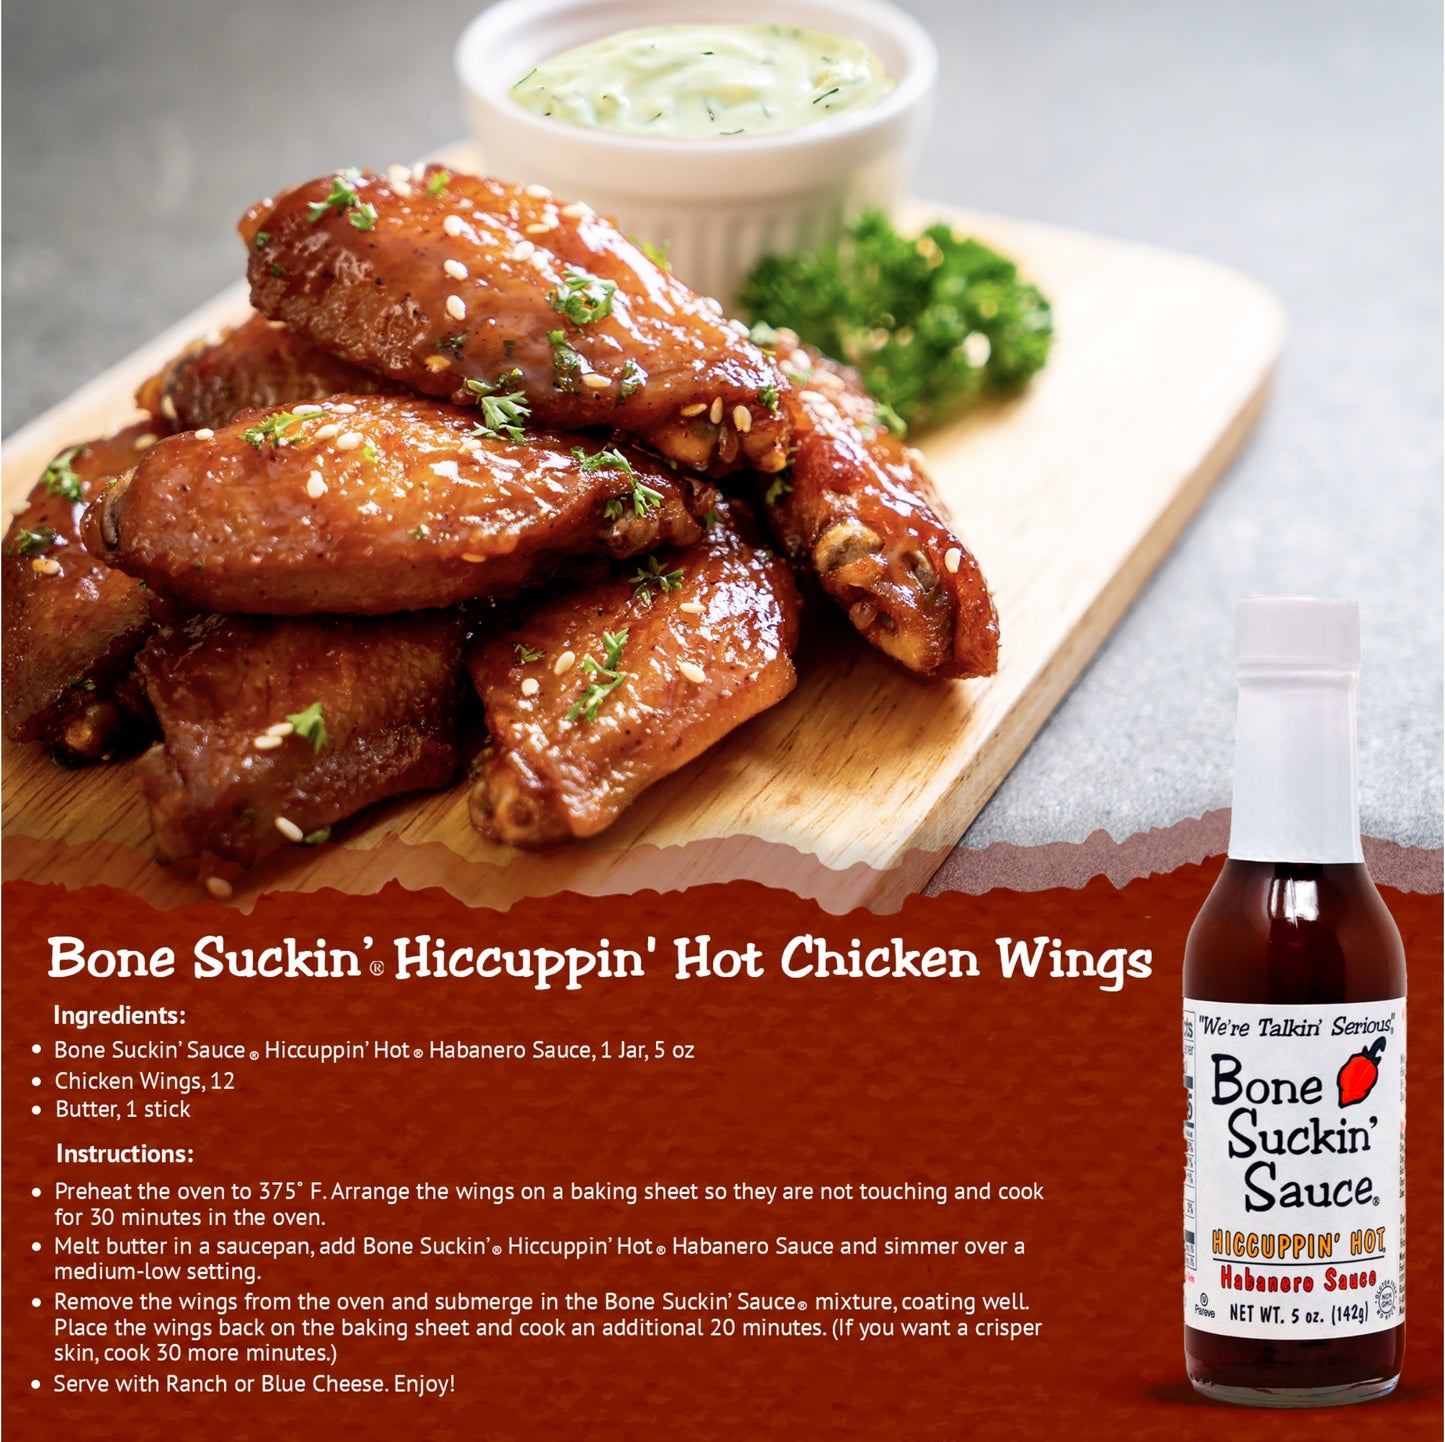 Bone Suckin' Hiccuppin' Hot Chicken Wings Recipe. Ingredients: Bone Suckin' Sauce Hiccuppin' Hot Habanero Sauce, 1 jar. 12 chicken wings. 1 stick butter. Instructions: Preheat oven to 375. Arrange wings on baking sheet, not touching. Bake for 30 minutes. Melt butter in saucepan, add Bone Suckin' Hiccuppin' Hot Habanero Sauce and simmer over medium-low setting. Remove wings from oven and submerge in the Bone Suckin' Sauce mixture, coating well. Place wings back on baking sheet and cook 20 more minutes. 